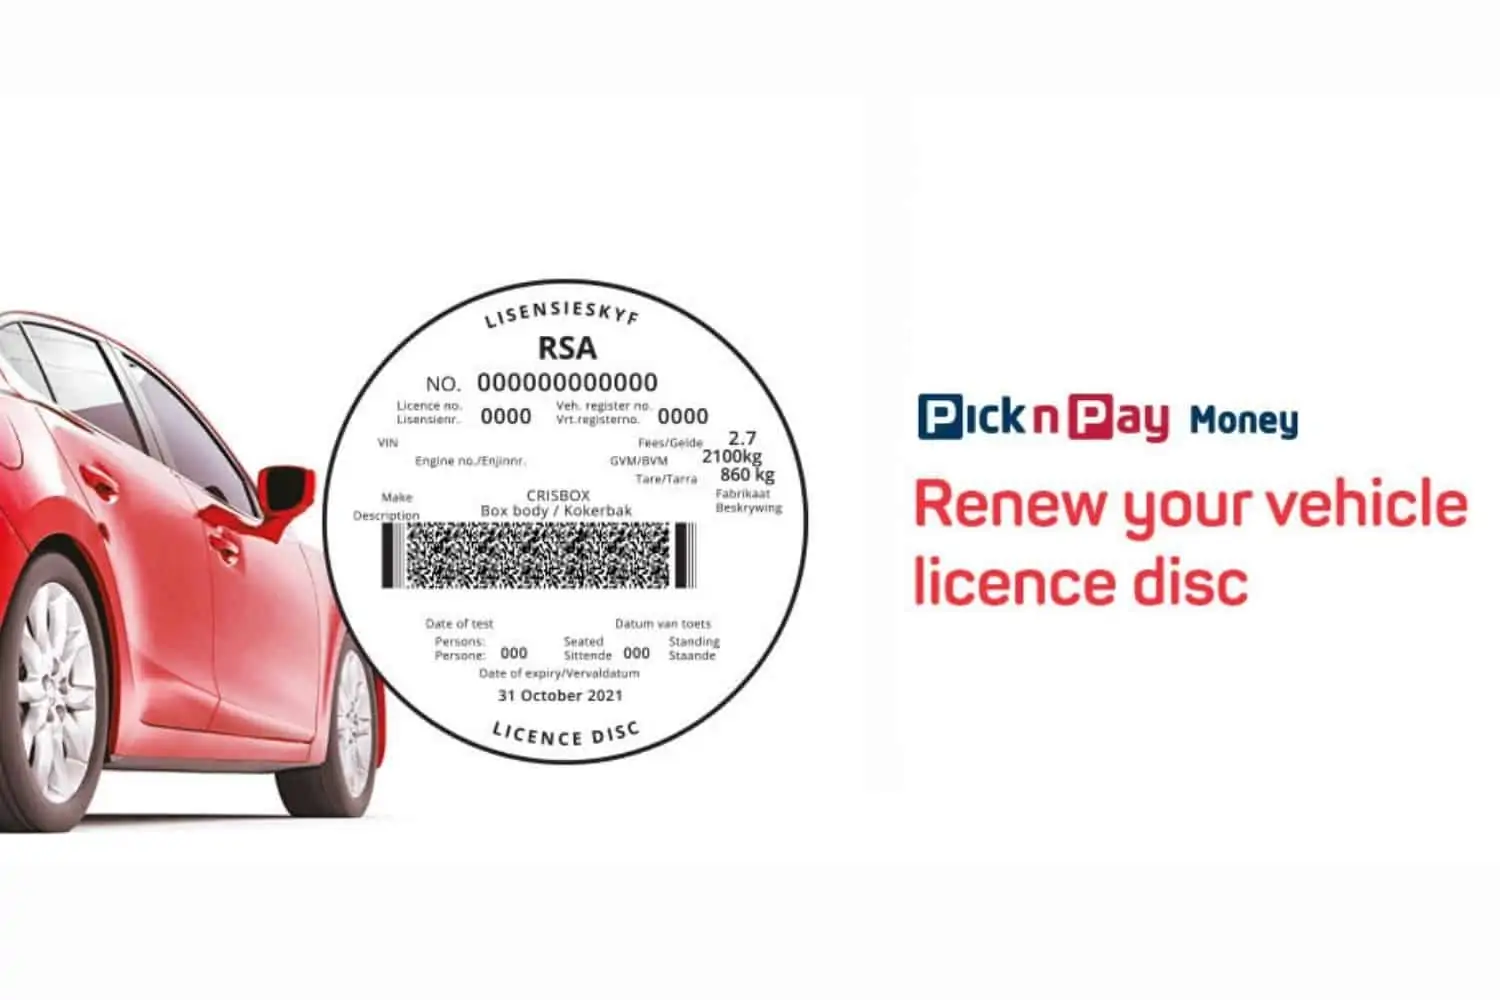 Motorists can now renew their licence disc at Pick n Pay